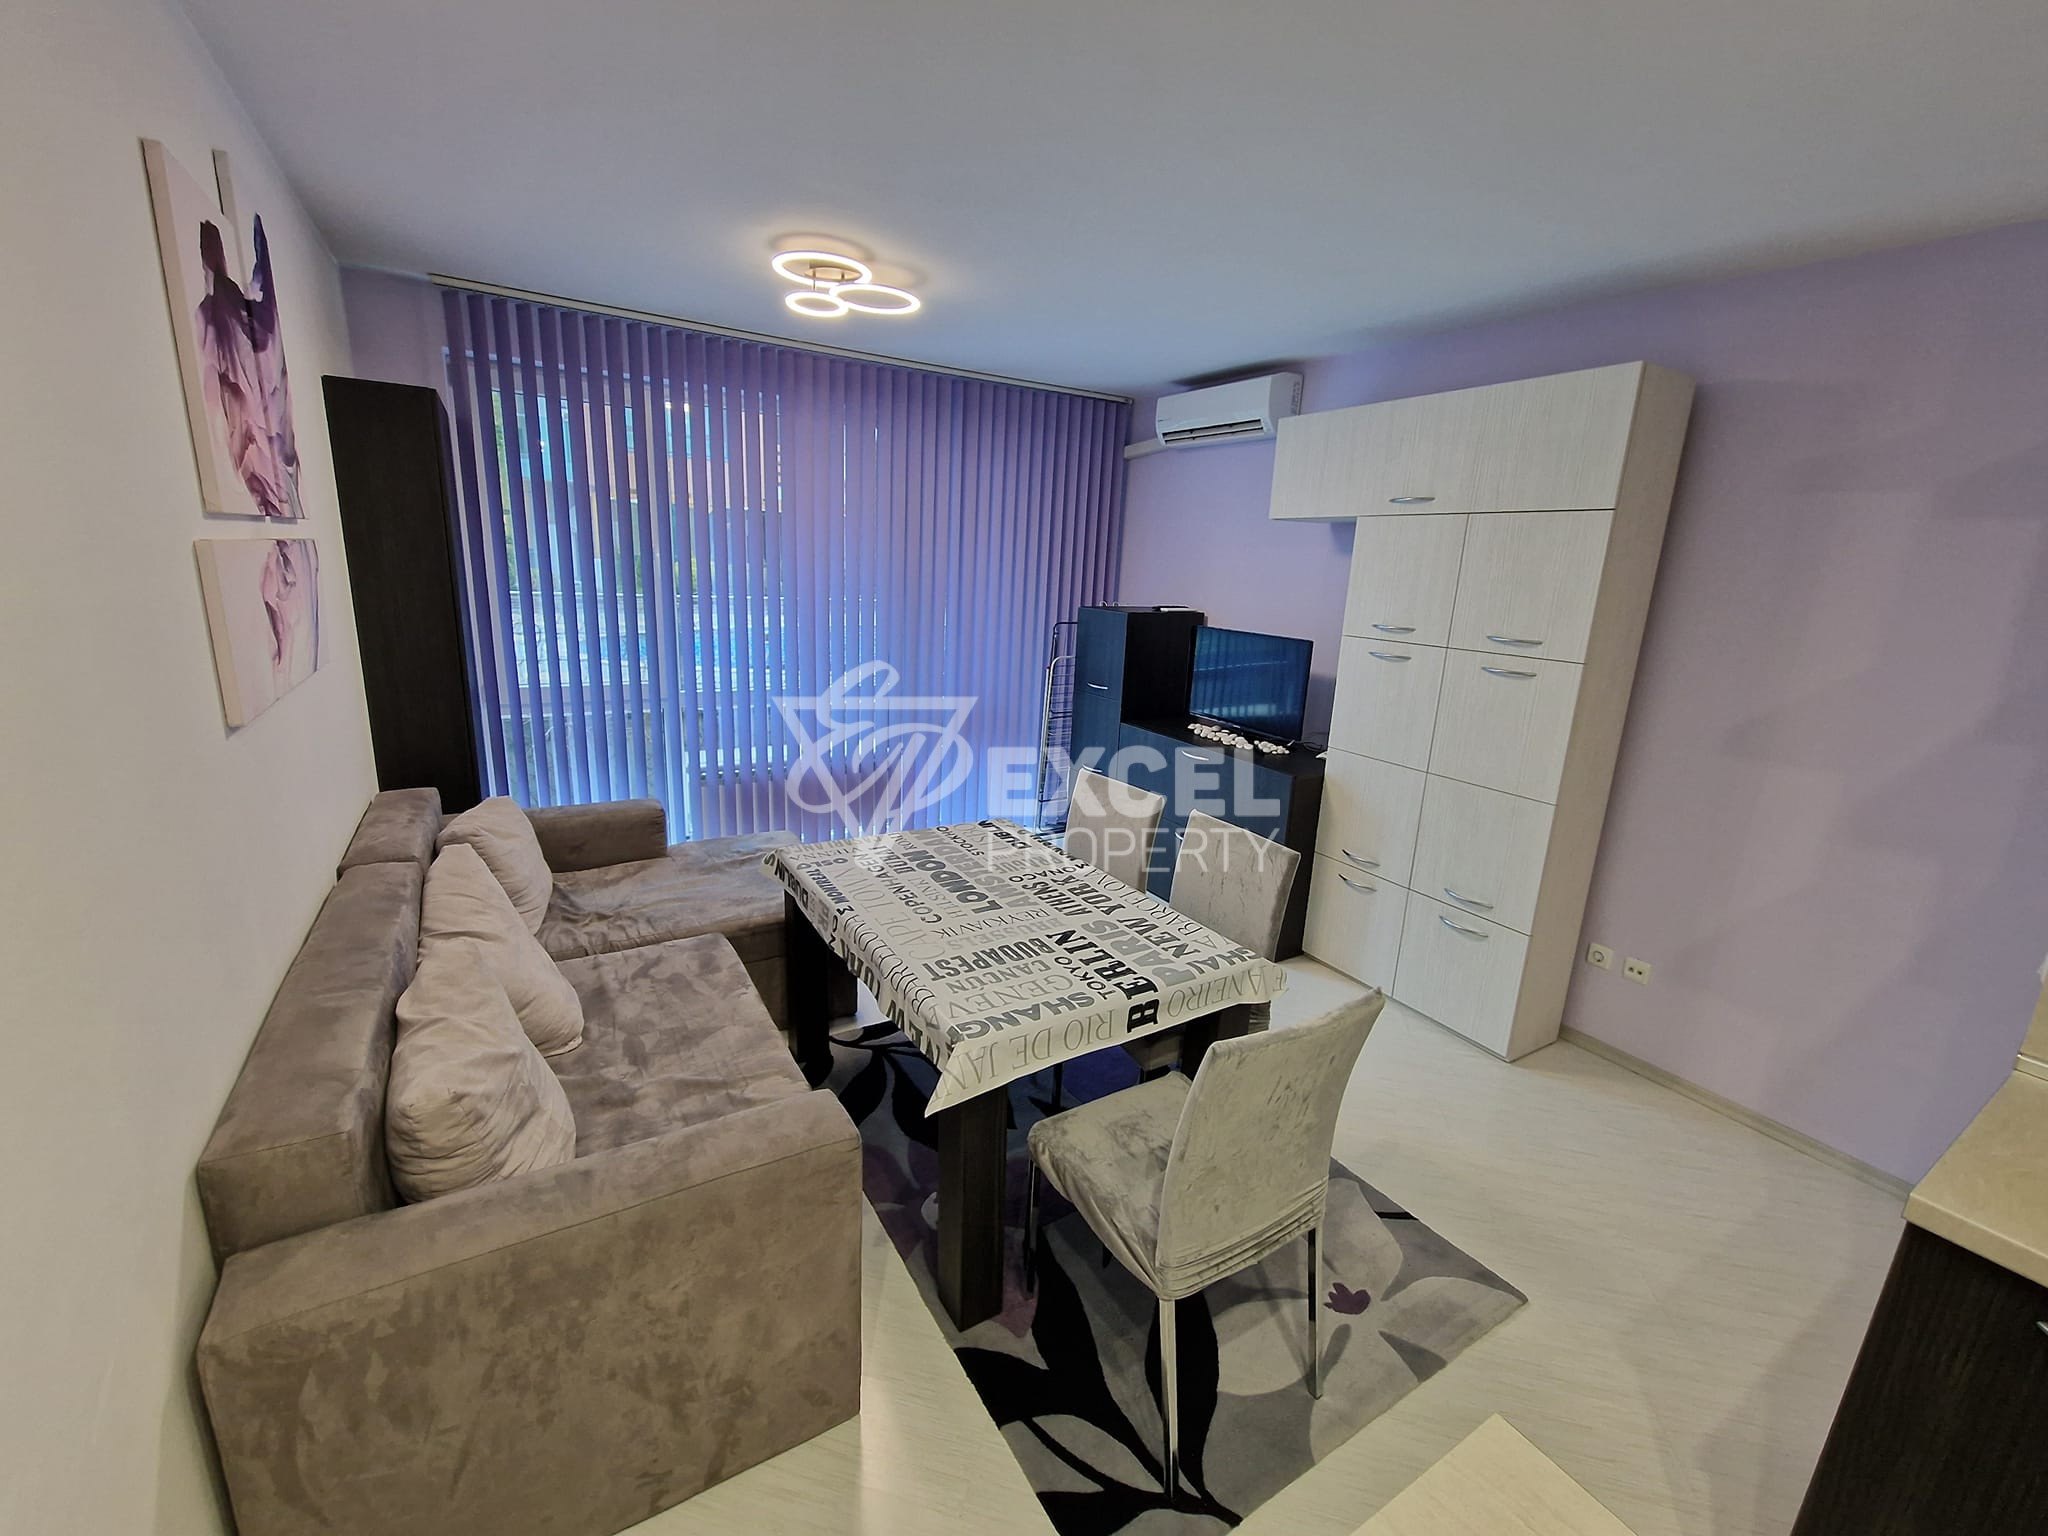 One-bedroom apartment for rent in Boyana Fantasy, Sofia